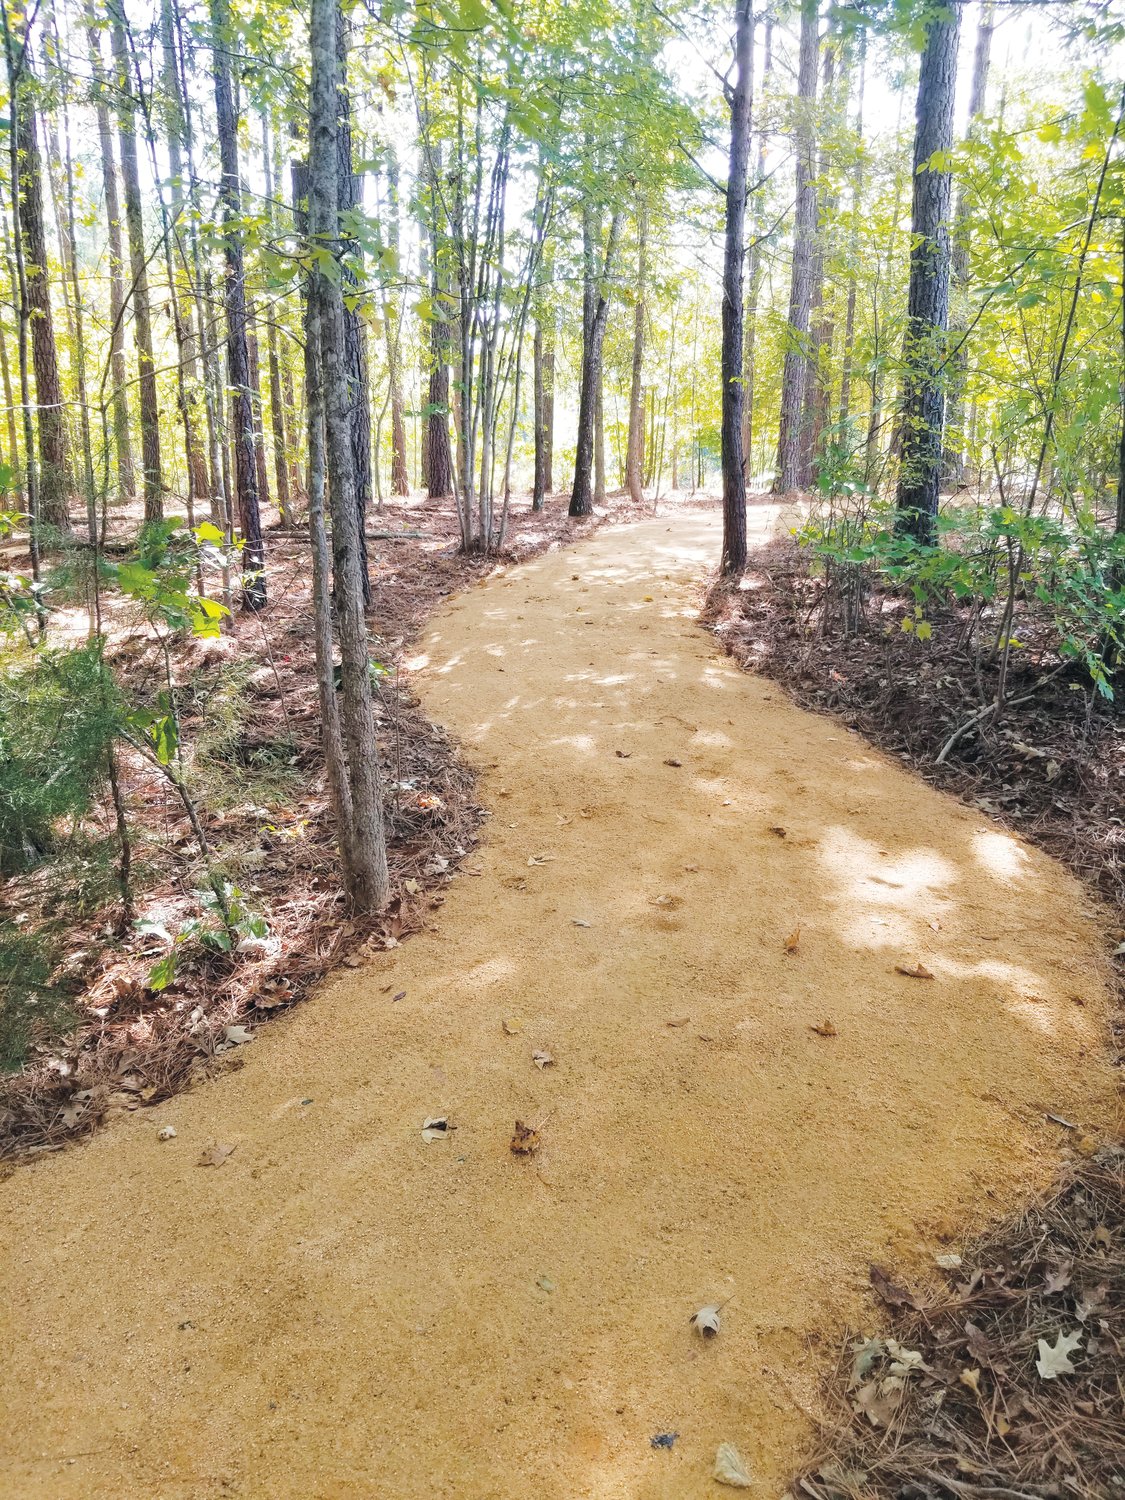 Part of the 'Peacful Pathway,' located at Northeast District Park at 5408 Big Woods Rd., Chapel Hill.